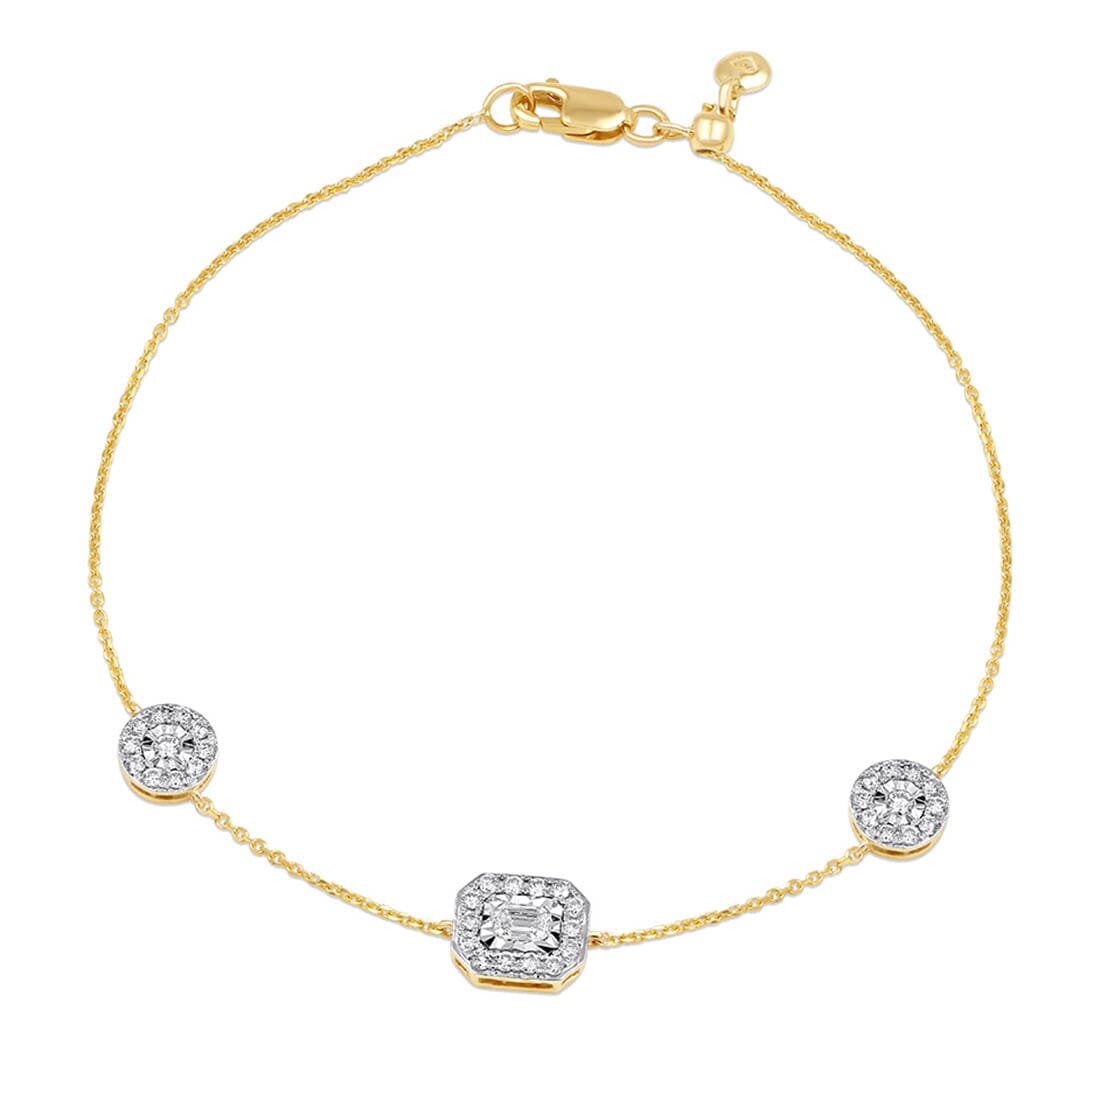 Meera Emerald Halo Station Bracelet with 1/2ct of Laboratory Grown Diamonds in 9ct Yellow Gold Bracelets Bevilles 